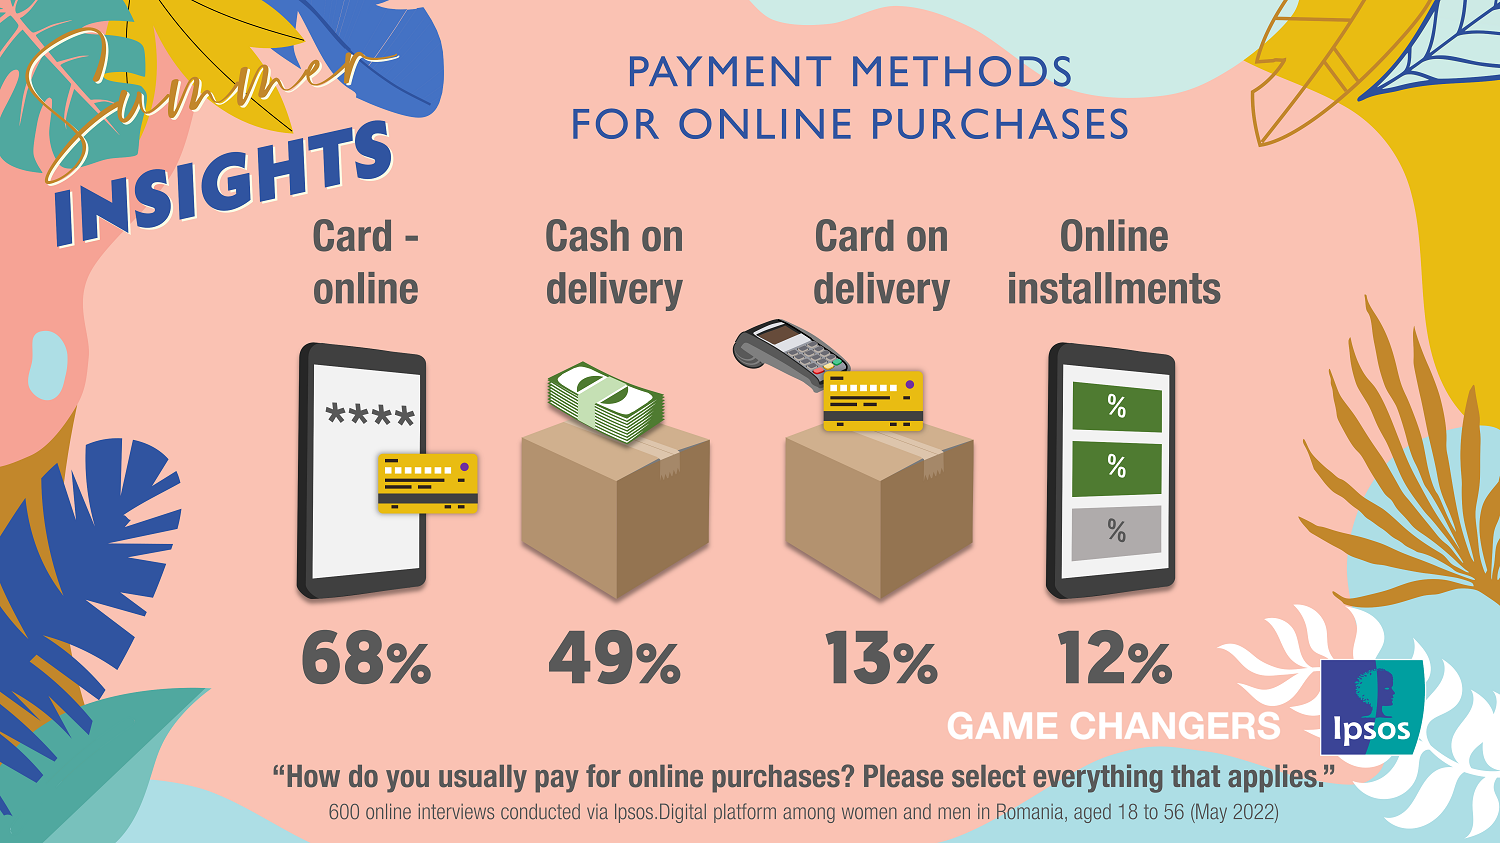  Ipsos Summer Insights 2022_Payment Methods for Online Purchases